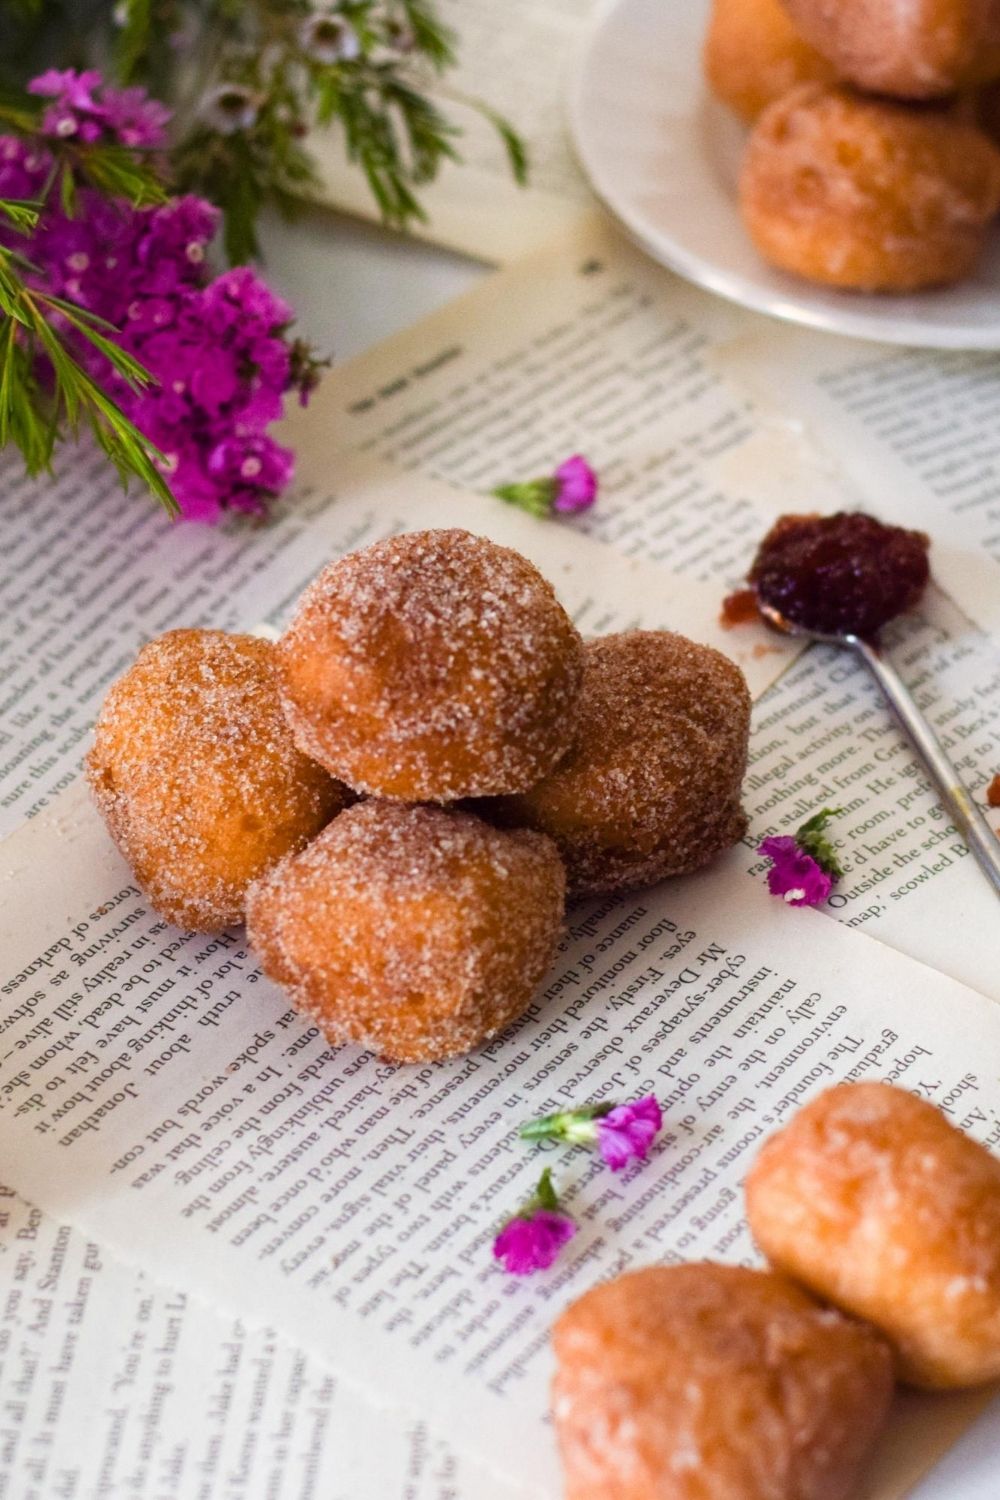 Doughnut Holes on paper with flowers on left and jam on right